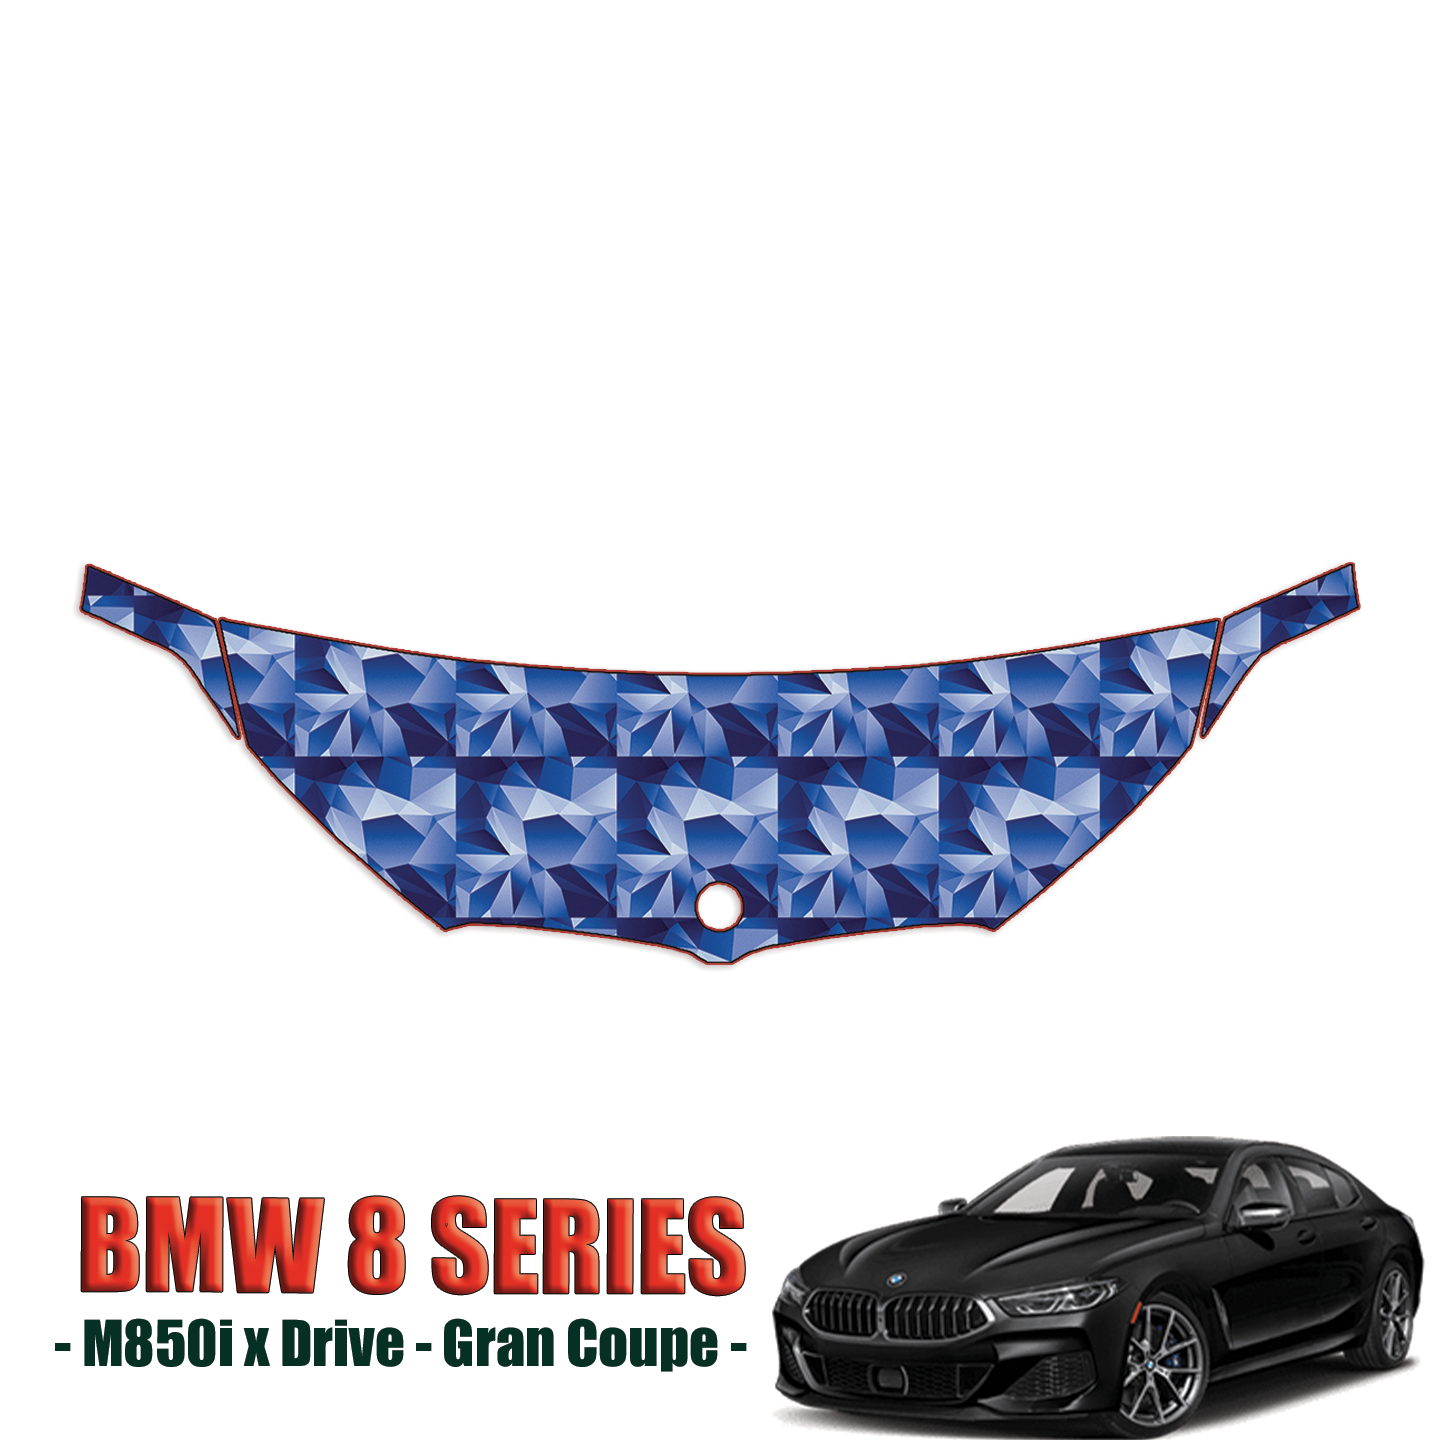 2020-2023 BMW 8 Series Gran Coupe M850i xDrive Precut Paint Protection Kit – Partial Hood + Fenders